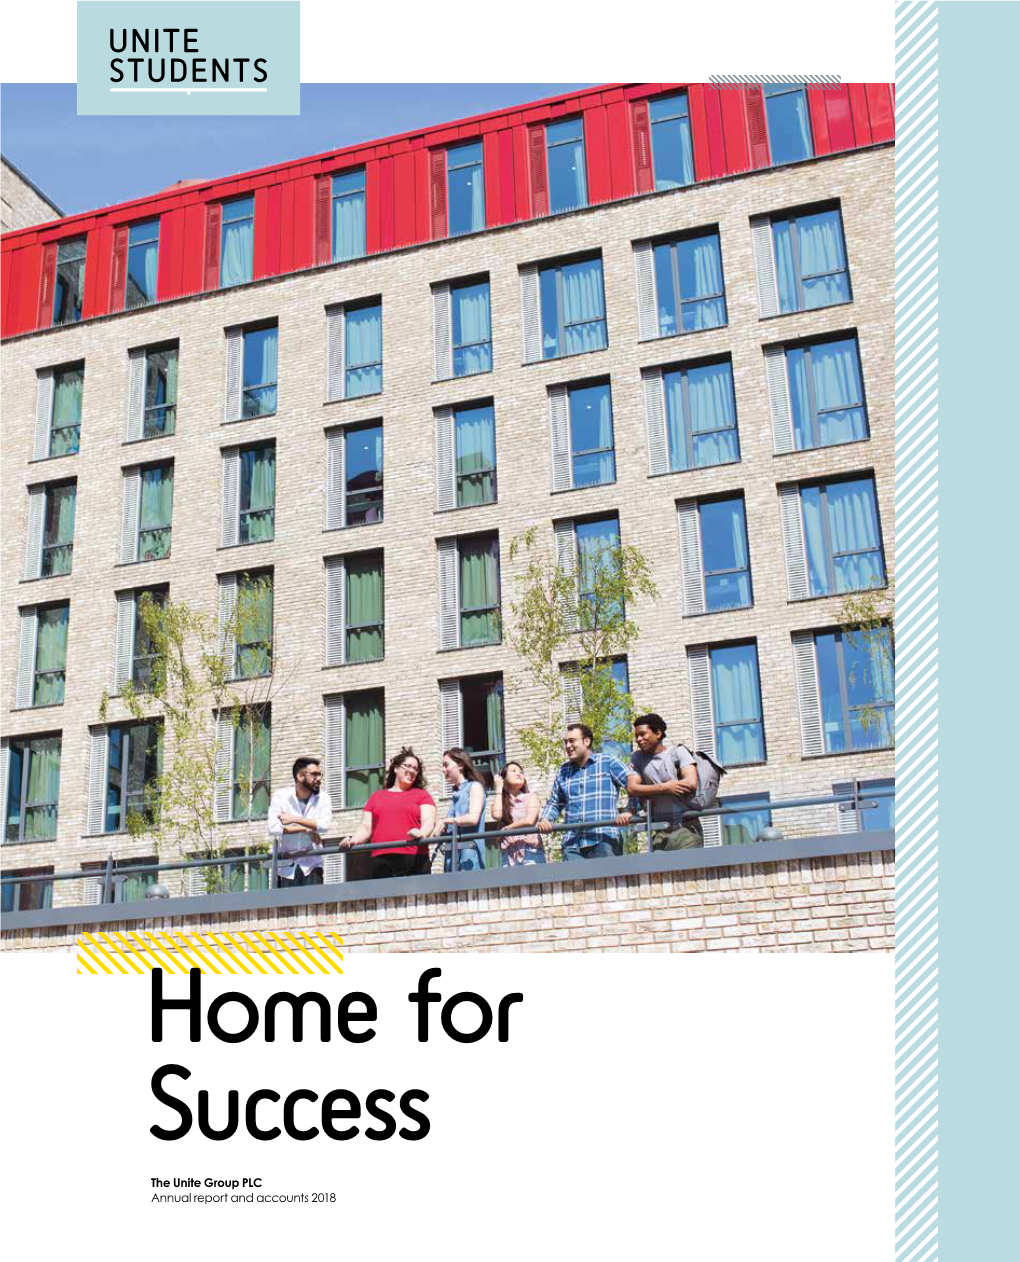 The Unite Group PLC Annual Report and Accounts 2018 HOME for SUCCESS